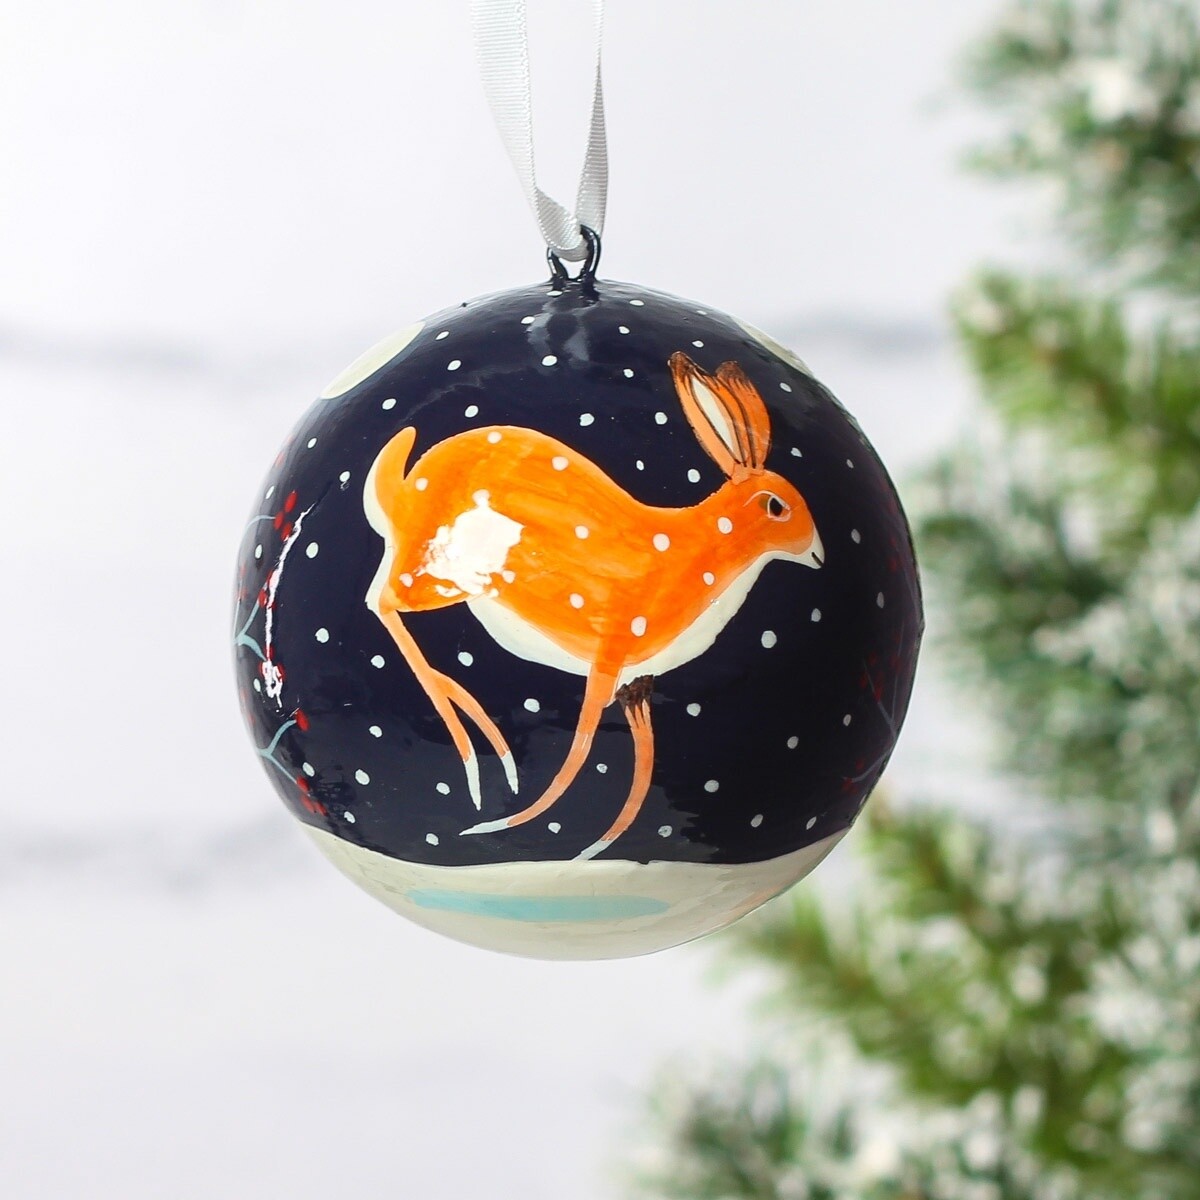 Hand Painted Papier Mâché Bauble - Winter Hare by Fair to Trade